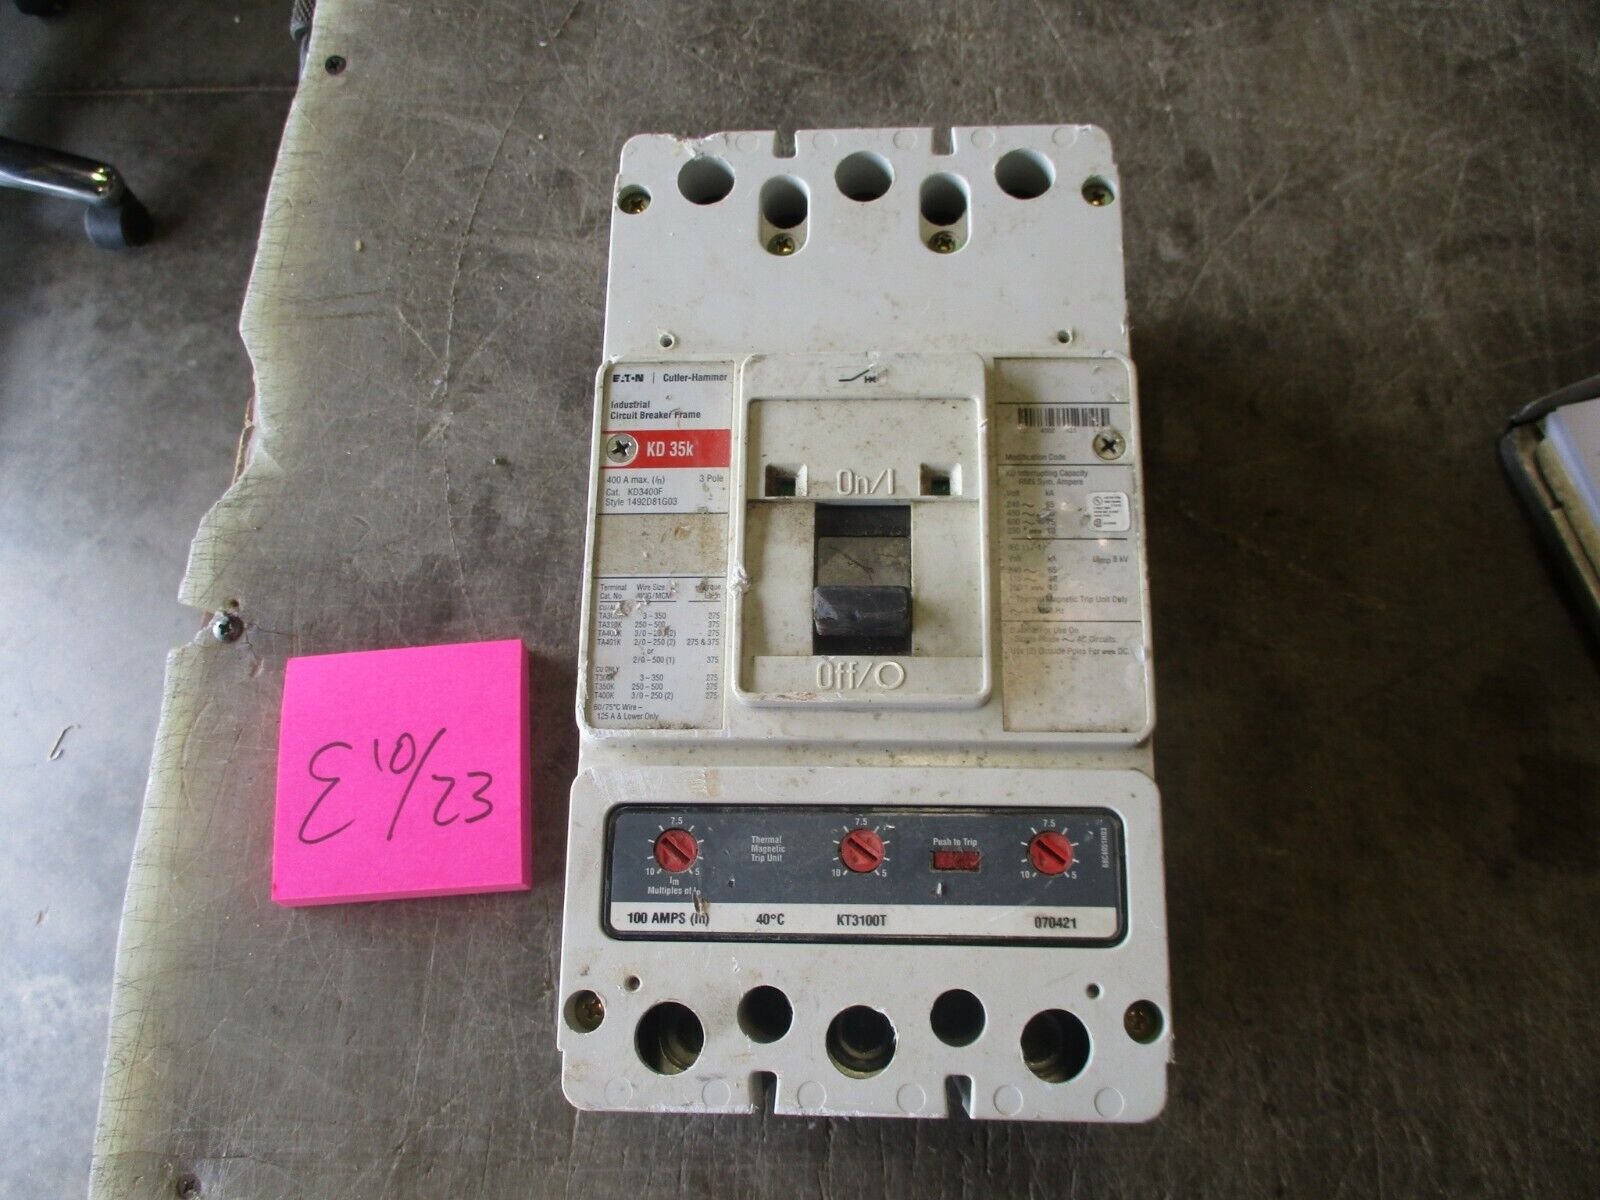 Used Eaton 400A Circuit Breaker K035K, May or May not work properly-Sold as Core